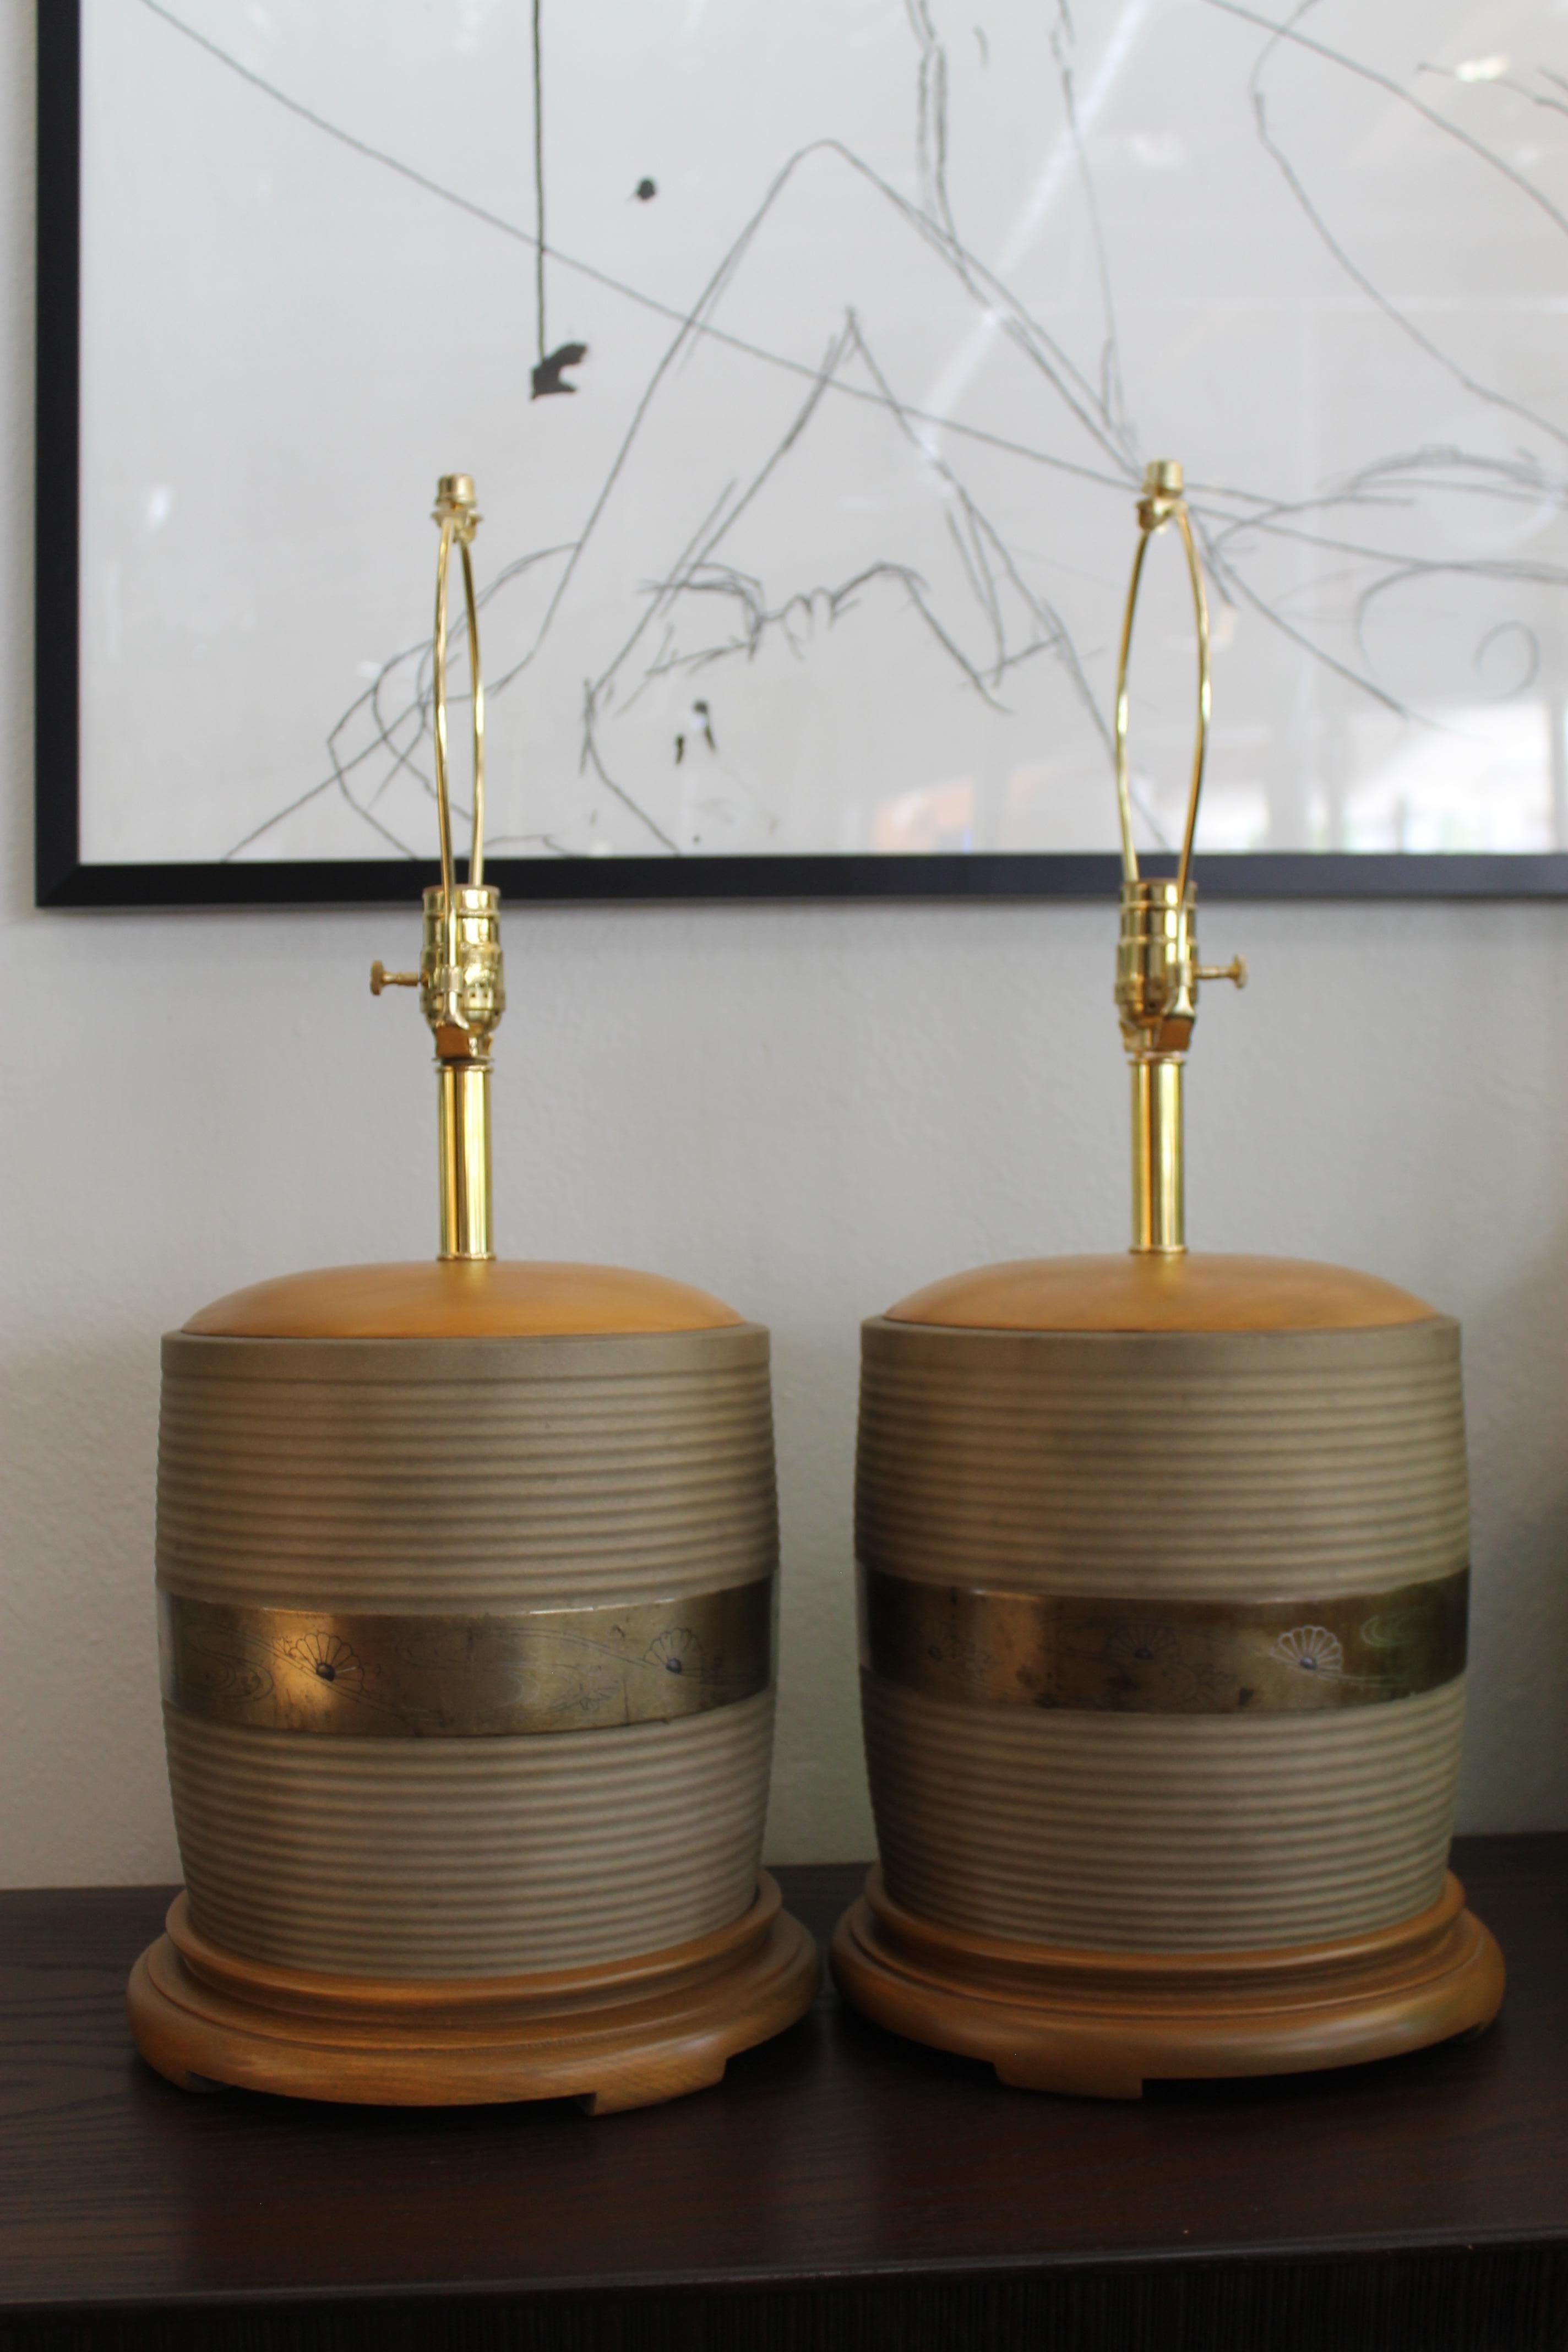 Pair of brass with silver inlay lamps. Middle brass portion is 9.25